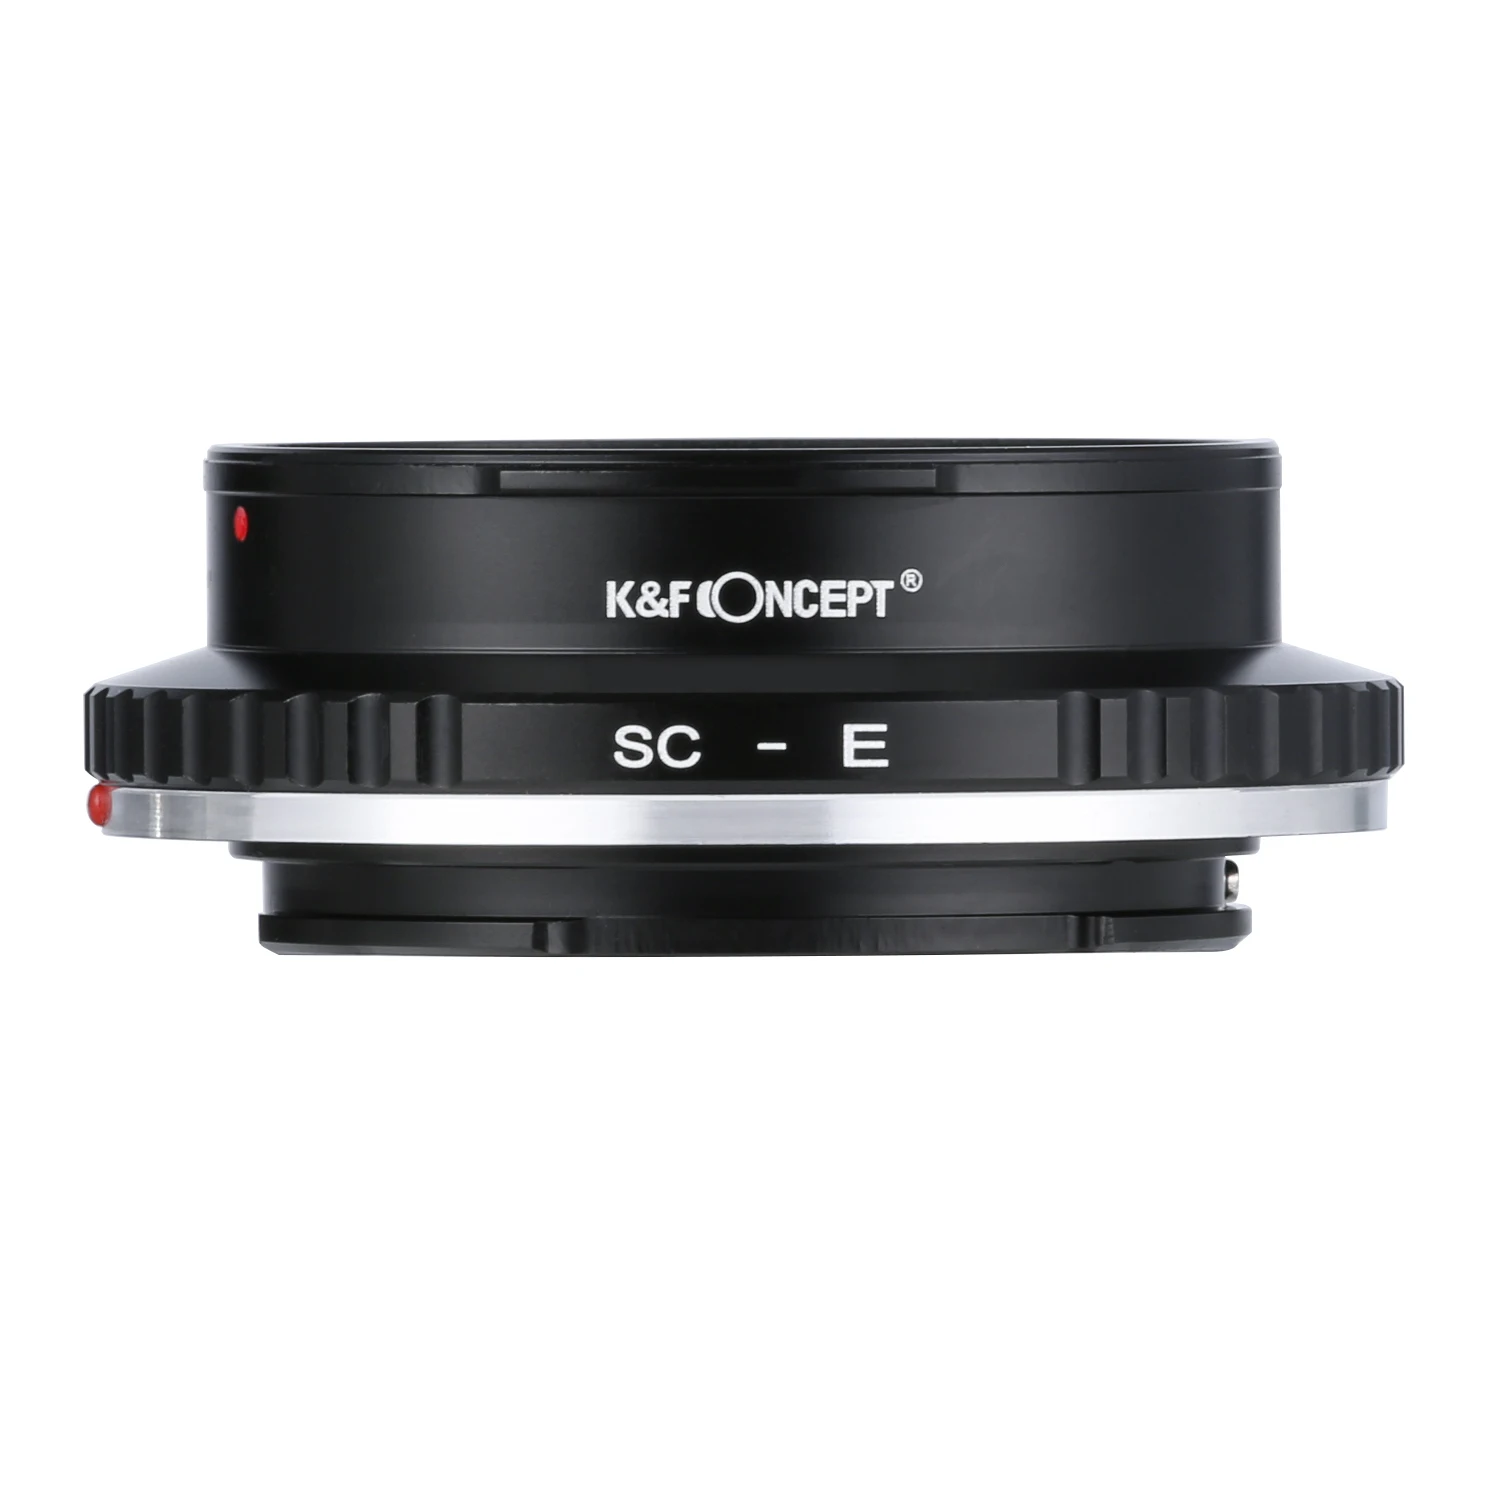 

K&F Concept Contax RF to Sony E Lens Adapter for Sony E Camera a5000 a6000 a6400 A7C A7C2 A1 A9 A7S A7R2 A73 A7R4 A7R5